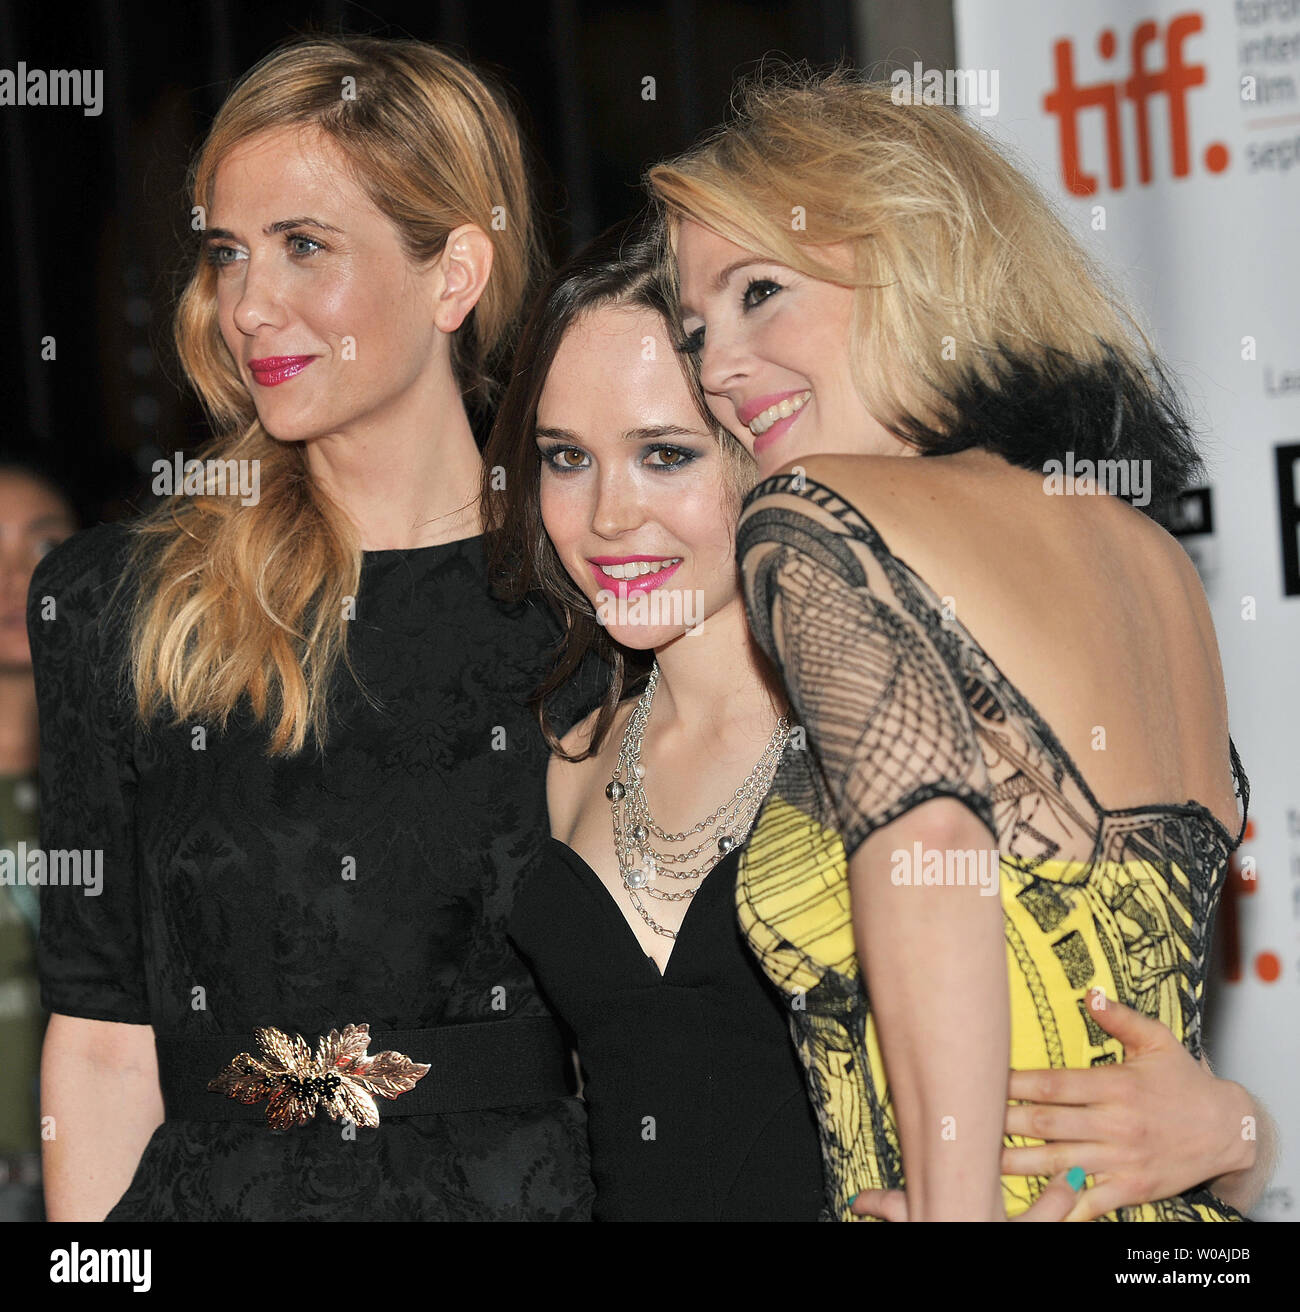 (R-L) Drew Barrymore, Ellen Page and Kristen Wiig arrive for the world premiere of Barrymore's directorial debut 'Whip It' at the Ryerson Theater during the Toronto International Film Festival in Toronto, Canada on September 13, 2009.  UPI /Christine Chew Stock Photo